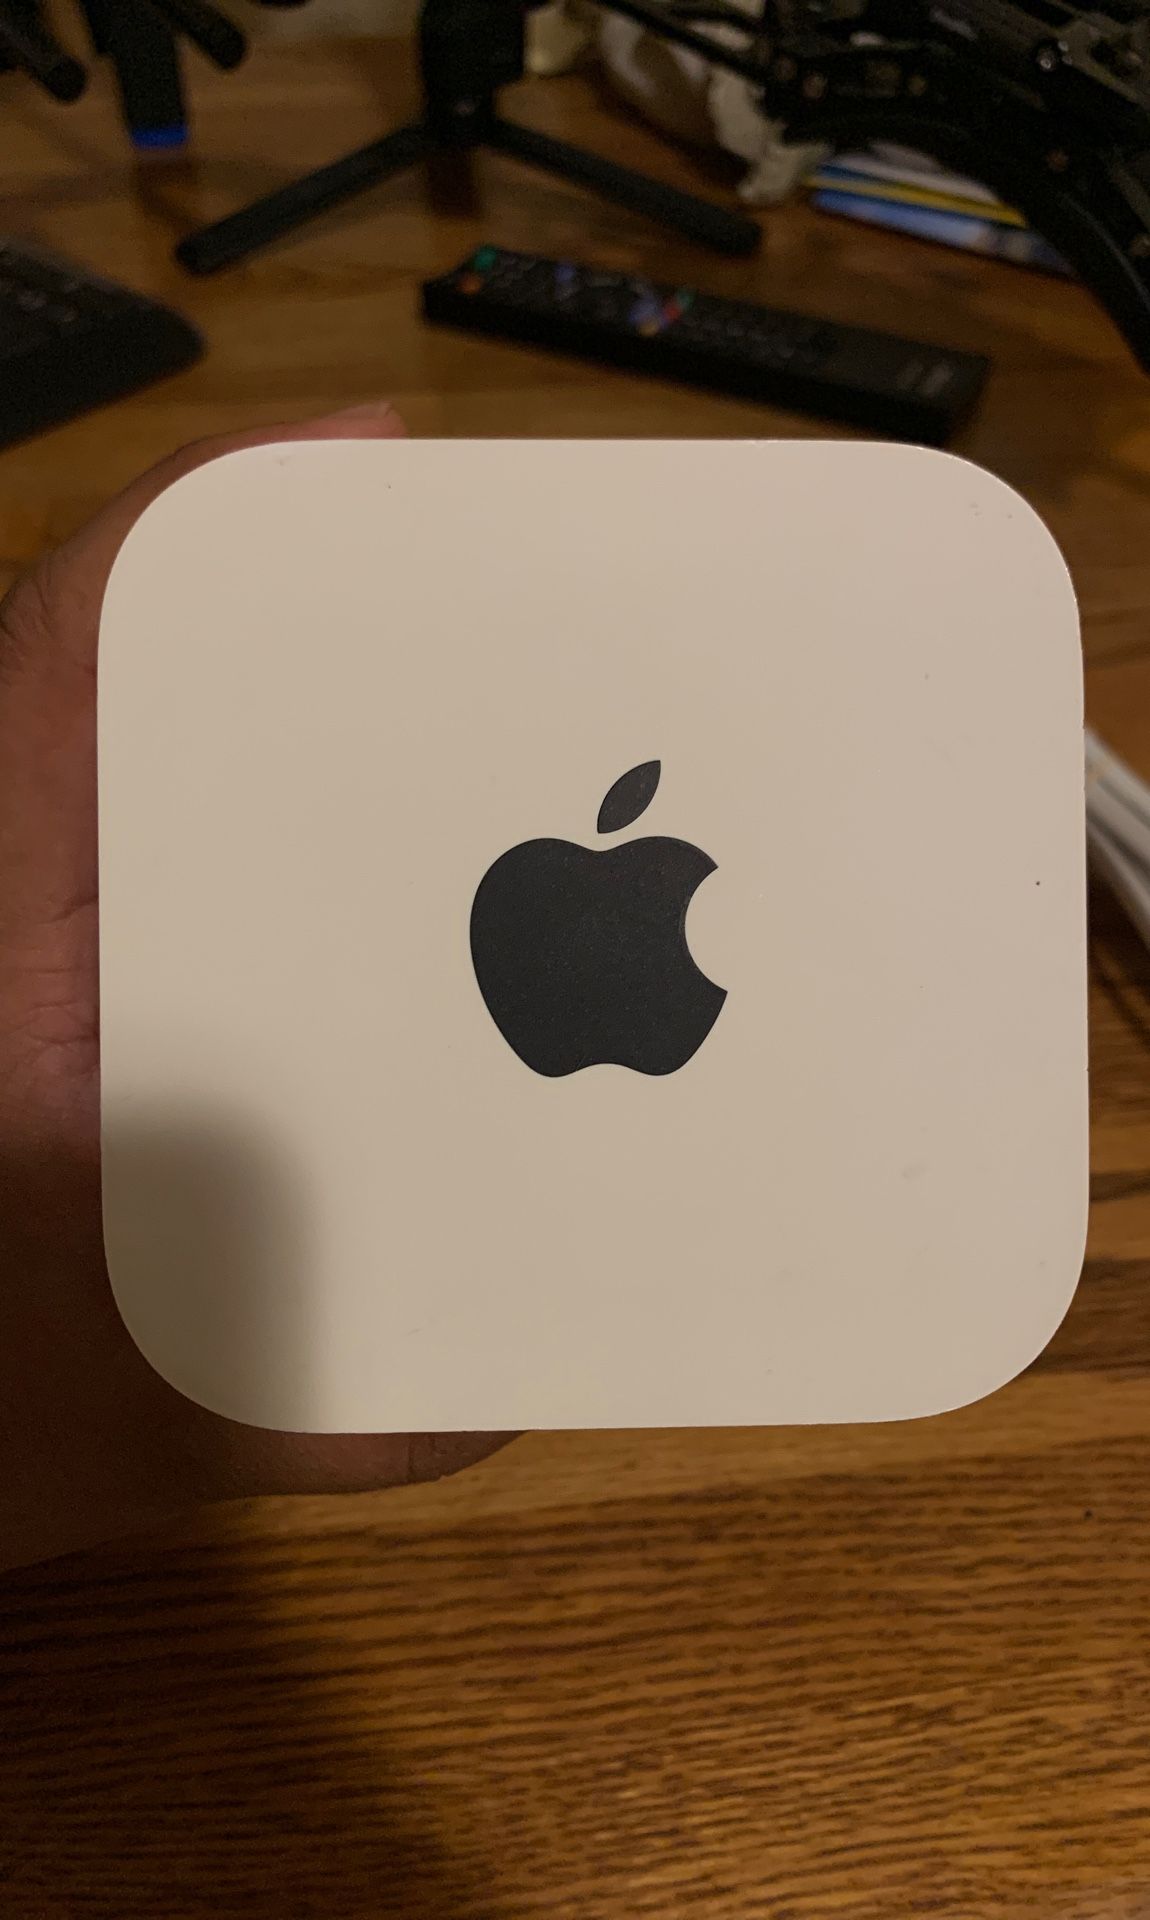 Apple AirPort Extreme Wireless Router WiFi 802.11ac A1521